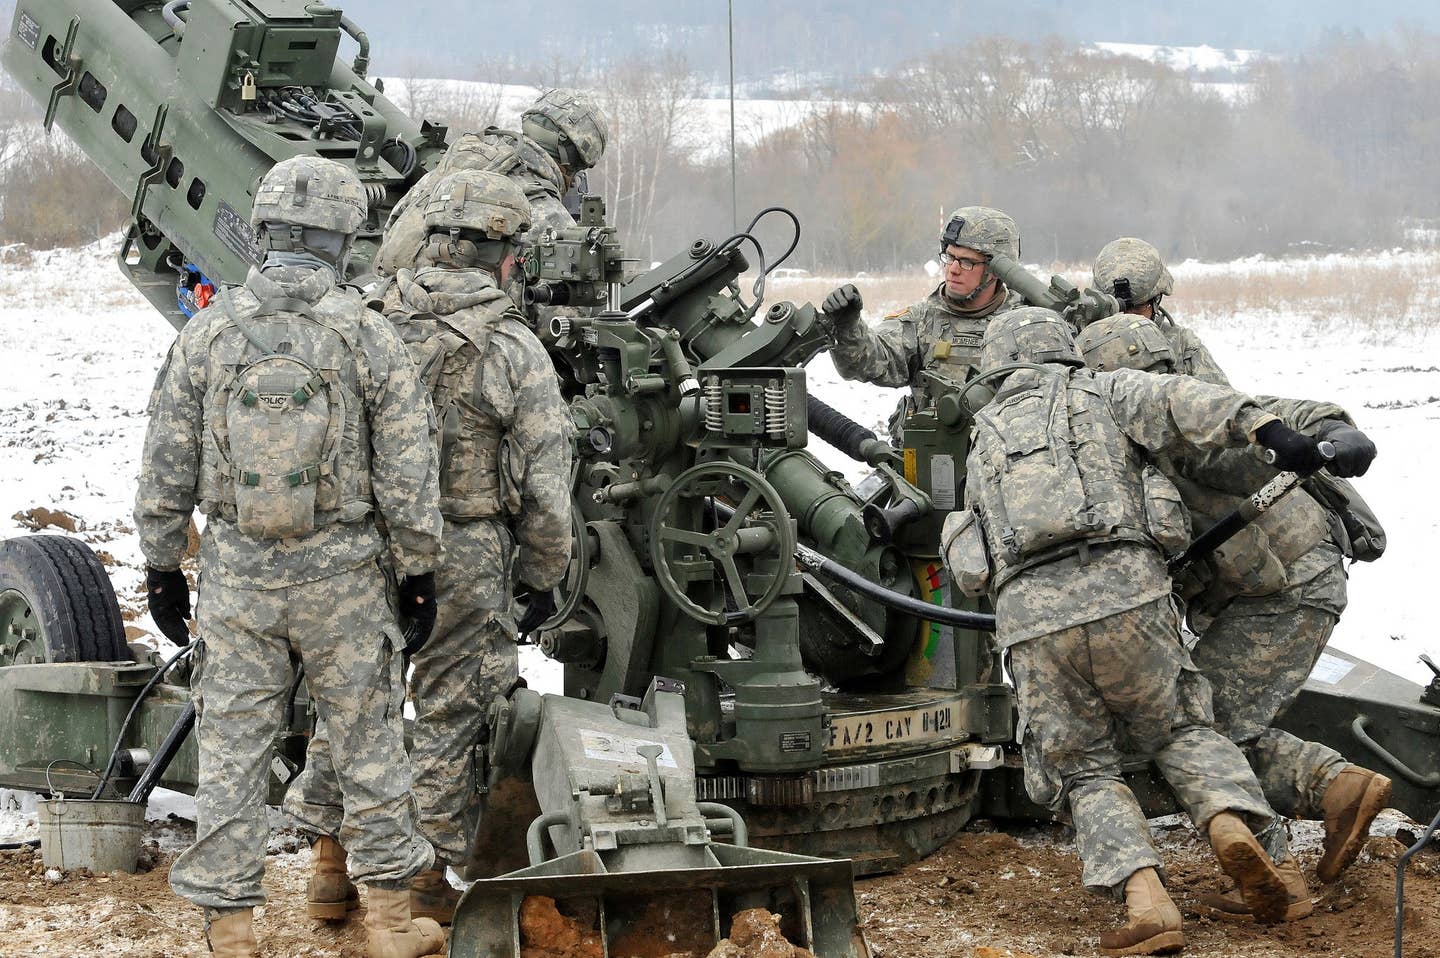 Soldiers load an M777u00a0155mm howitzer